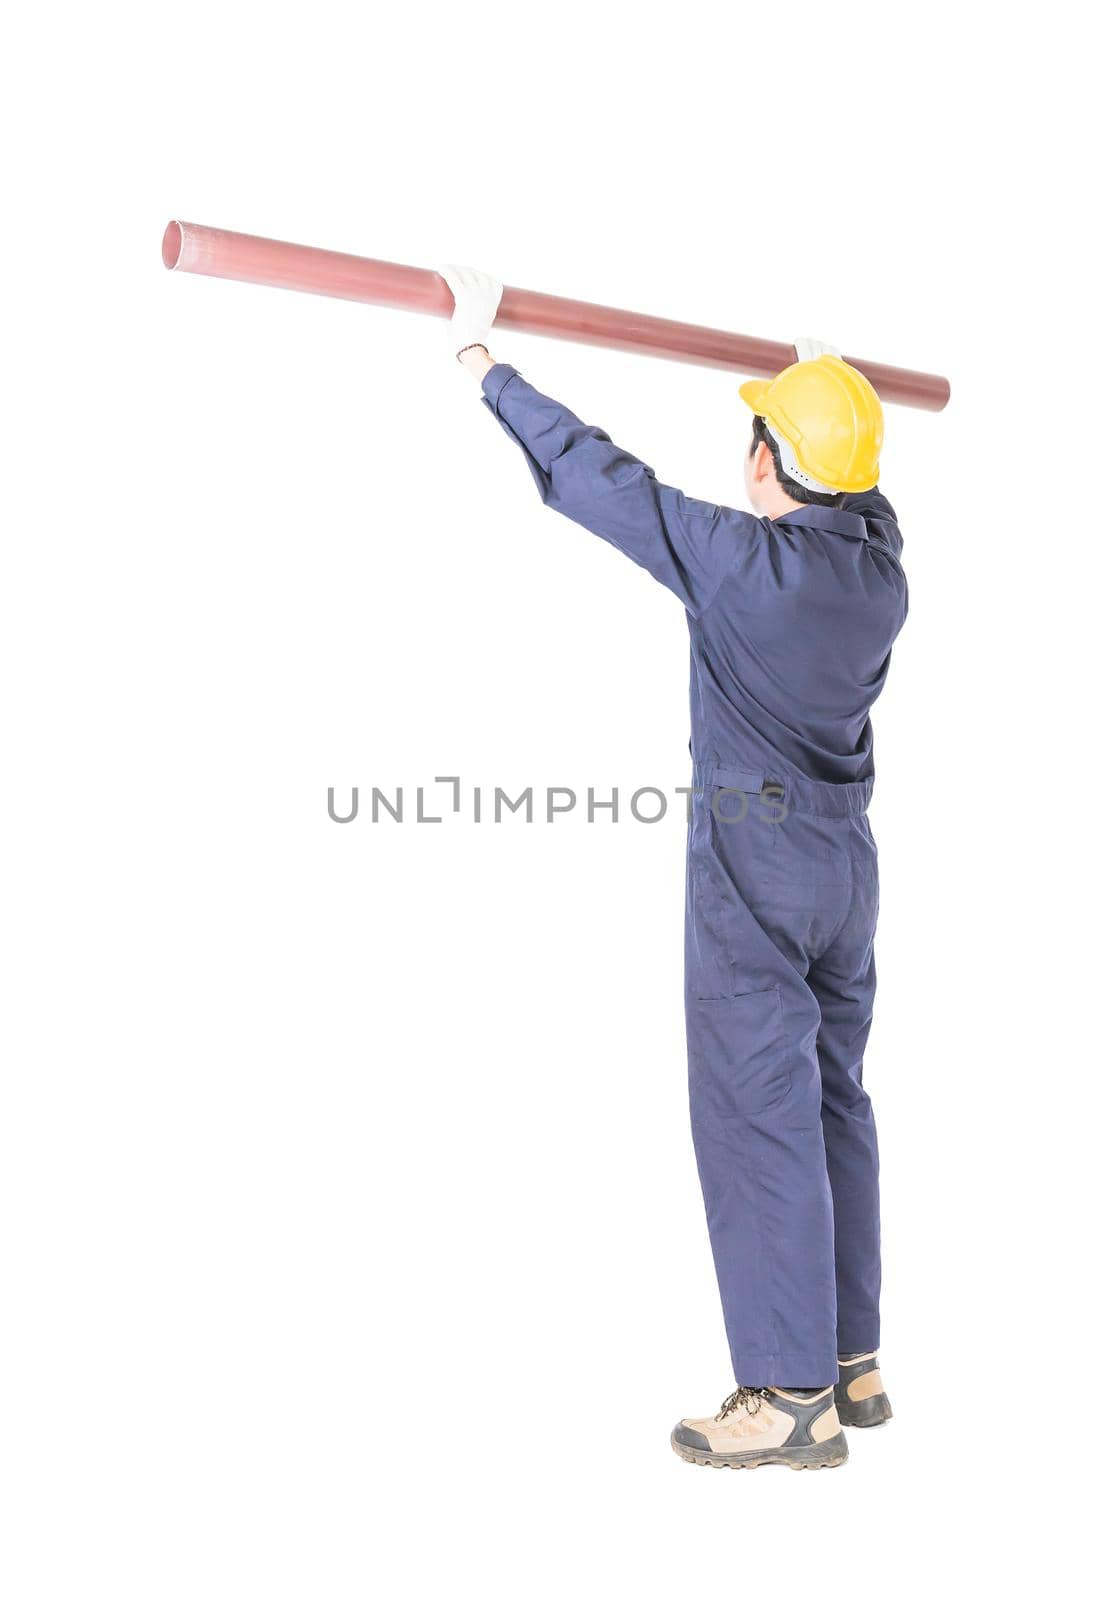 Plumber in uniform holding pvc pipe with clipping path by stoonn